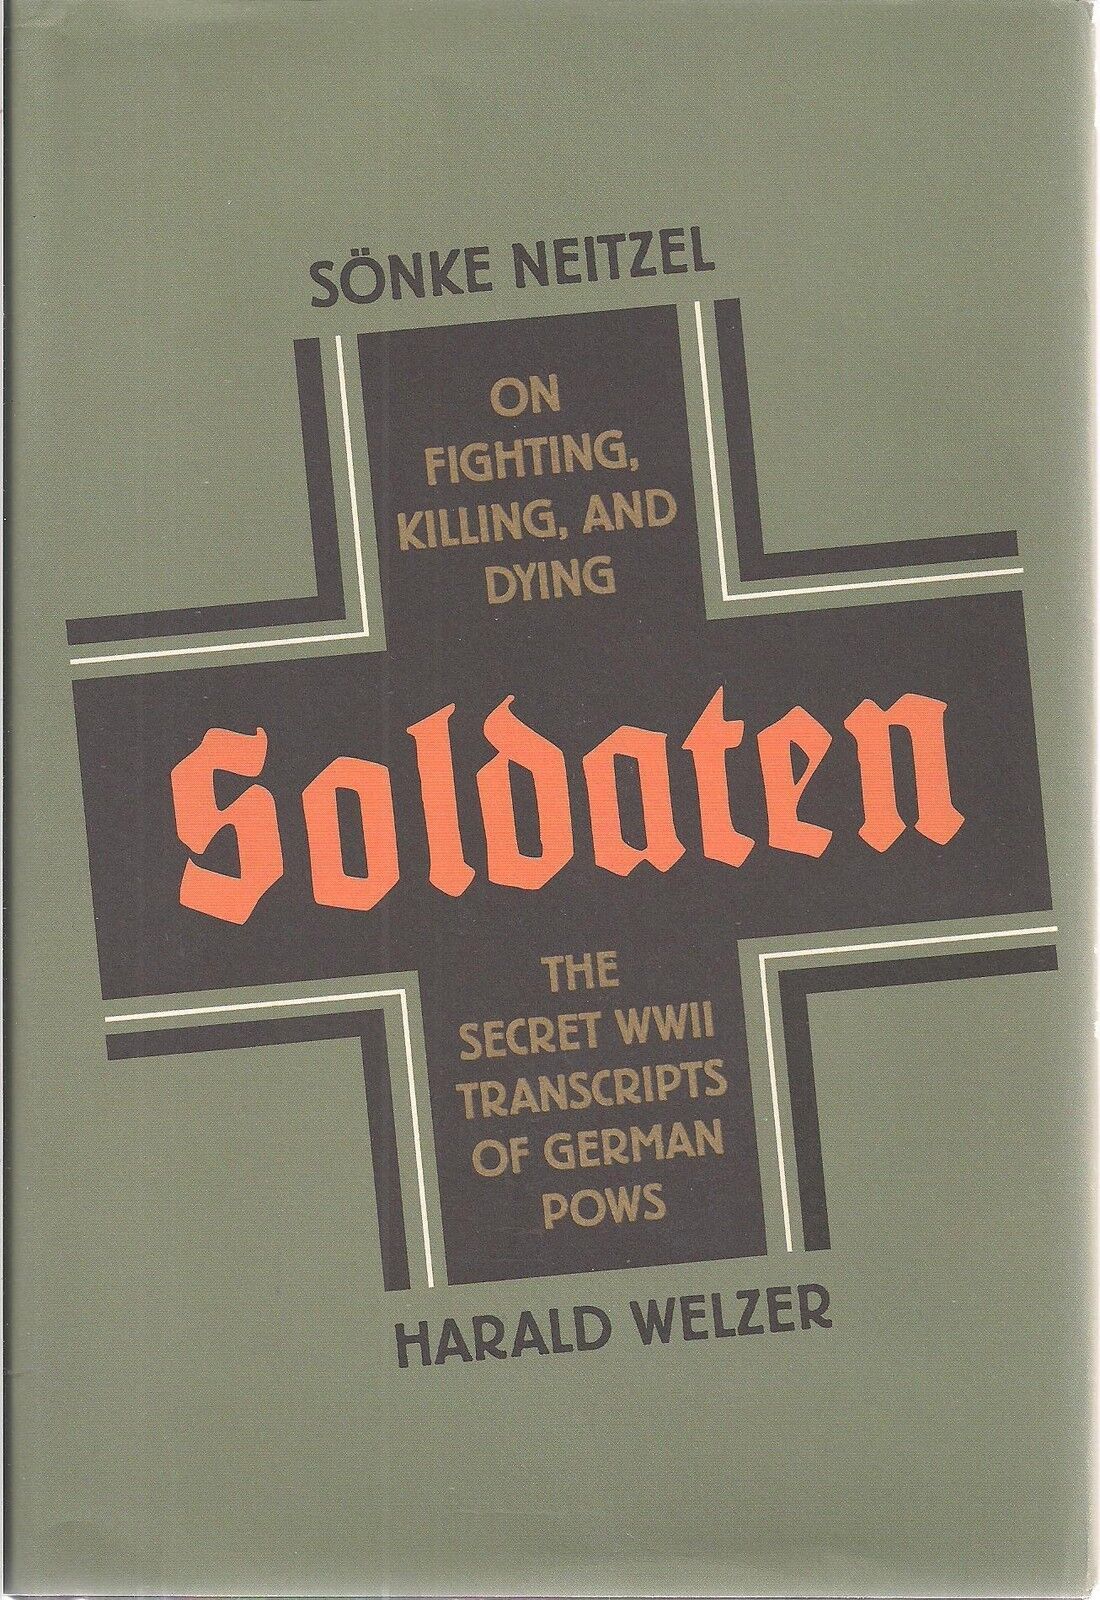 Primary image for Soldaten by Sonke Neitzel and Harald Welzer (Transcripts of German POWs)